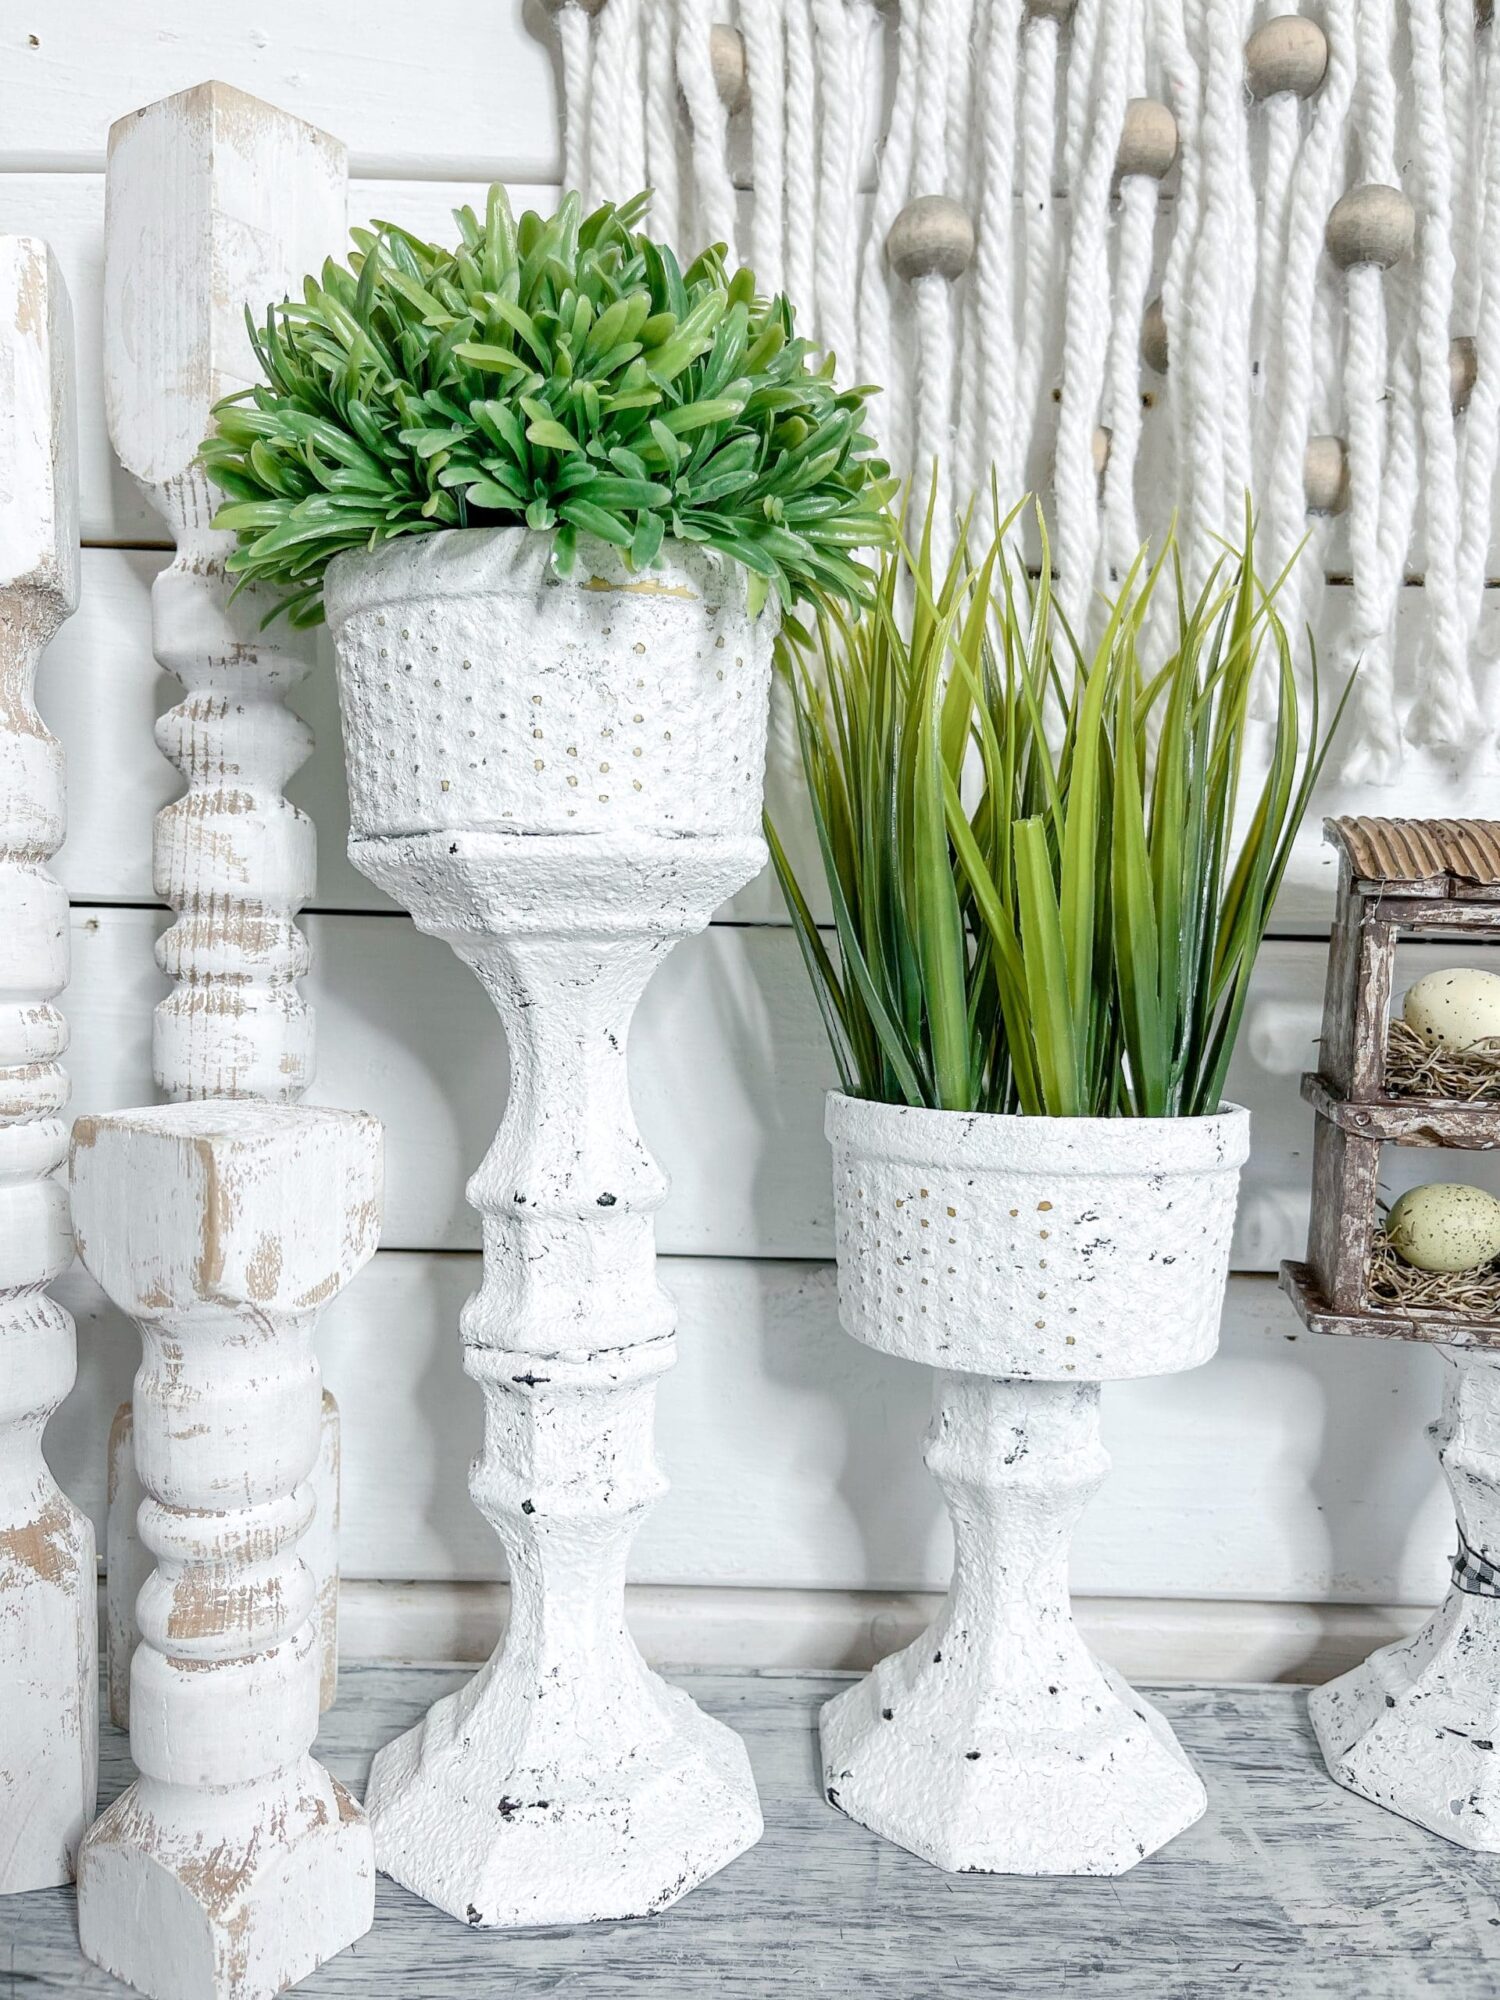 DIY Dollar Tree project with containers glued to candlesticks and then all painted with chalk paint to create a farmhouse look.